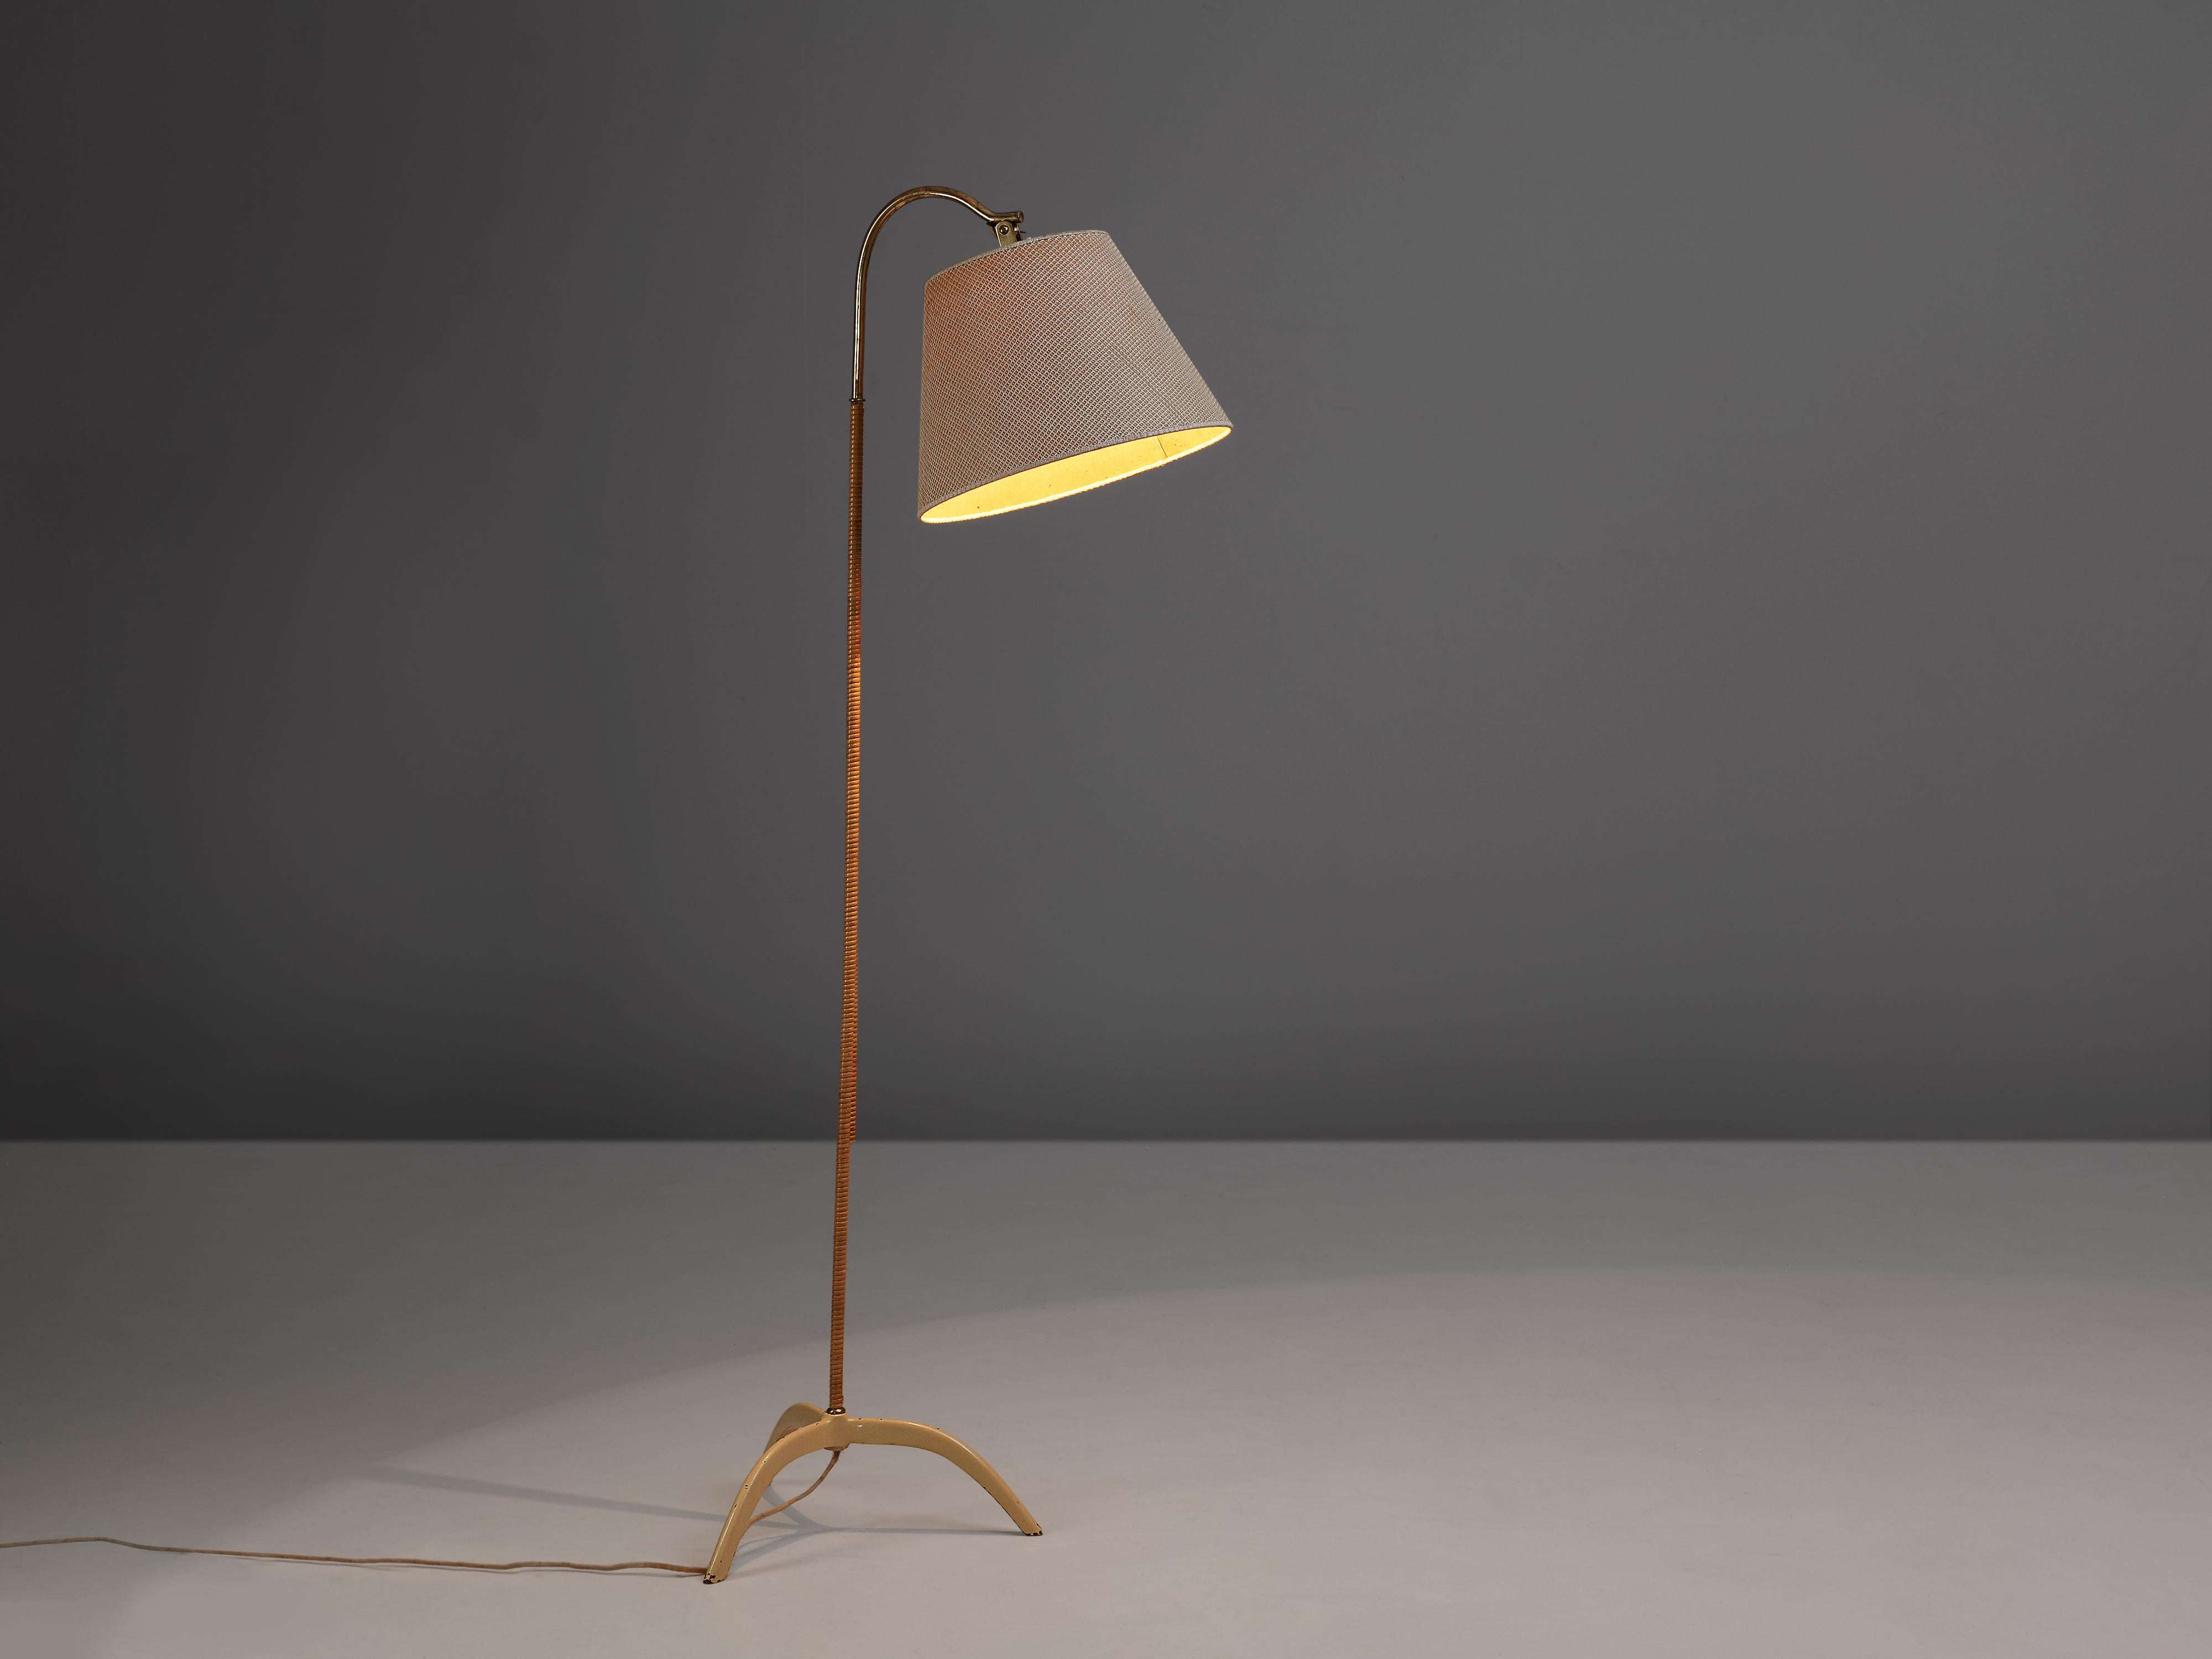 Paavo Tynell for Taito, floor lamp model 9609, metal, brass, cane, fabric, Finland, 1950s

The floor lamp model '9609' by Finish designer Paavo Tynell is a visual pleasure in many senses. Firstly, the surprising lines of the tripod base. For